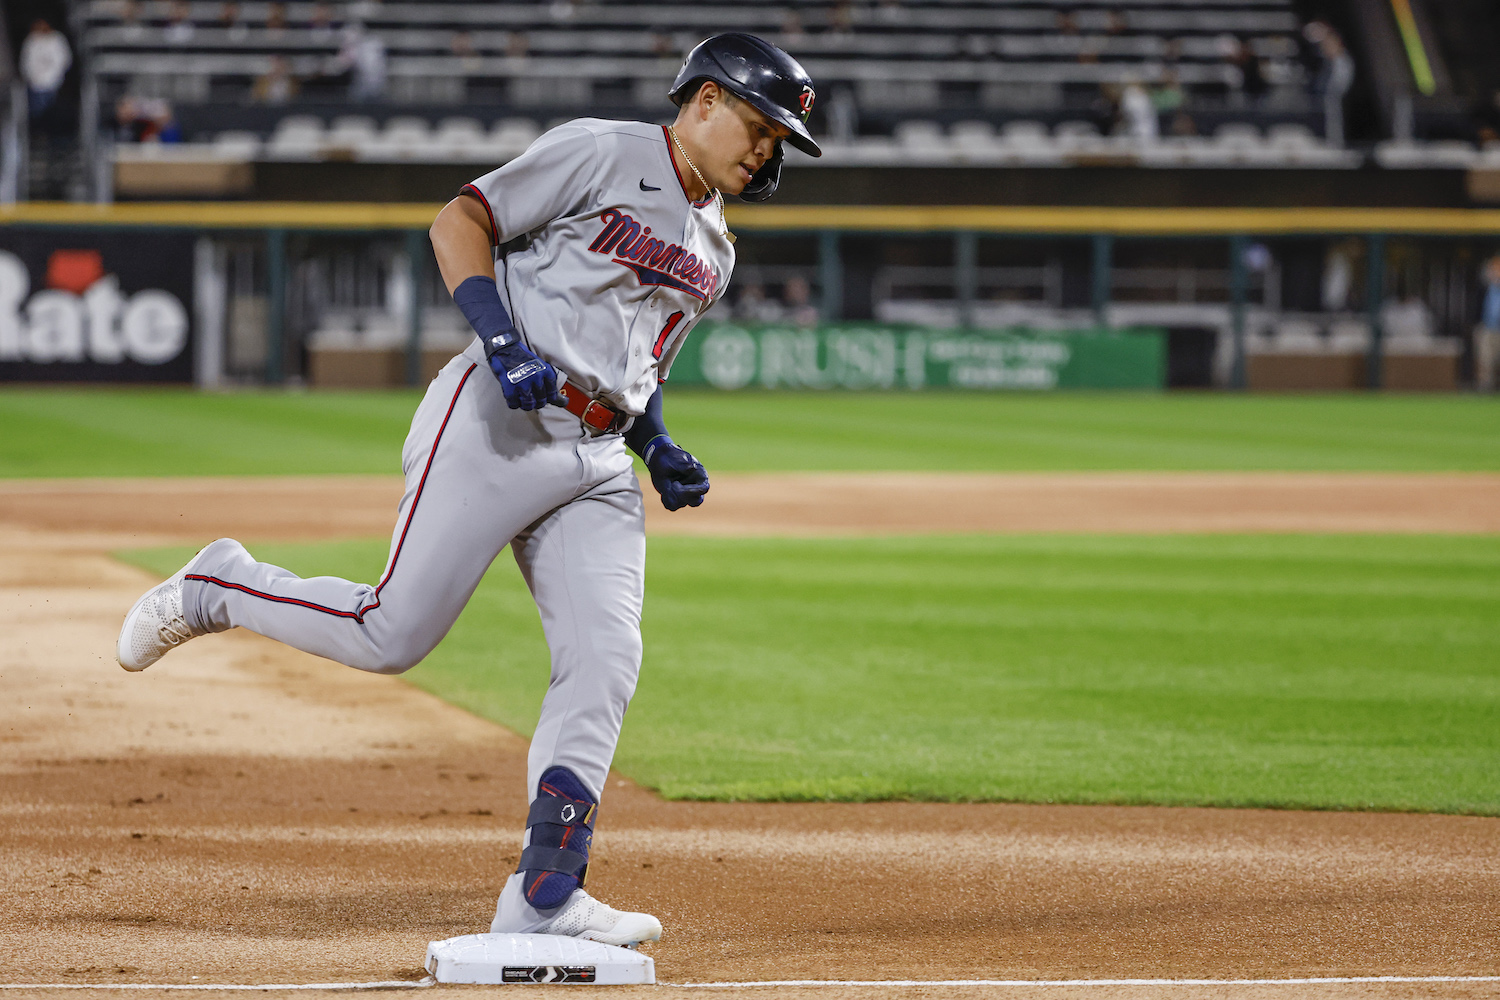 Luis Arraez, Carlos Correa, and Max Kepler Named Gold Glove Finalists -  Twins - Twins Daily